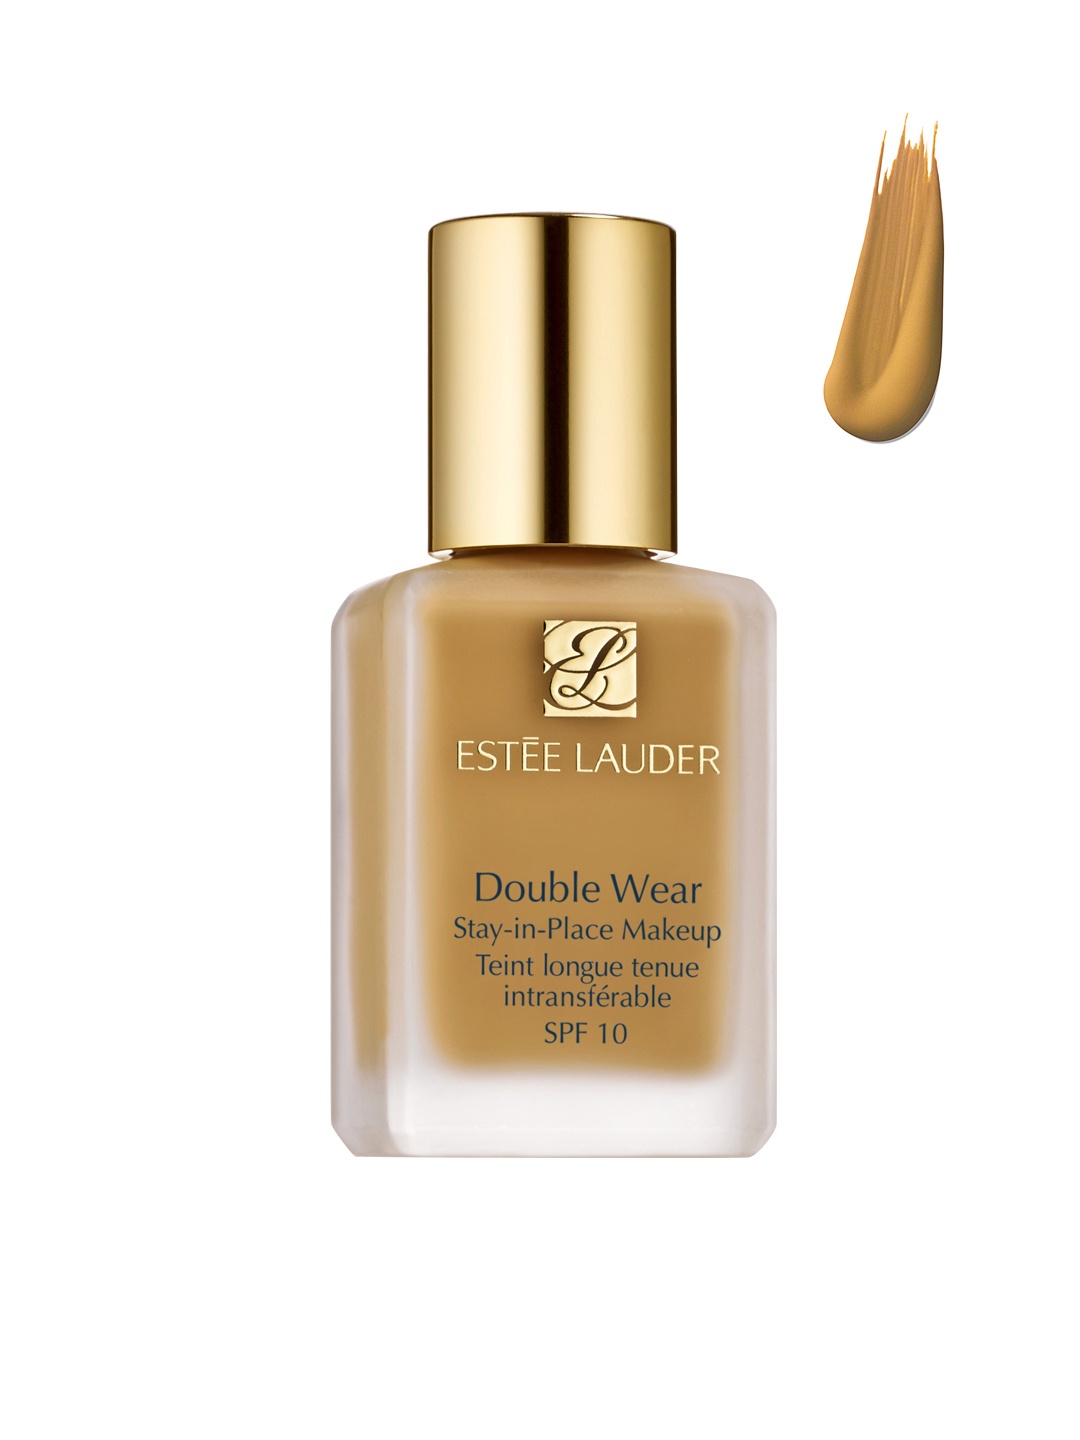 

Estee Lauder Double Wear Stay-In-Place Makeup Foundation with SPF 10 - Rattan, Beige